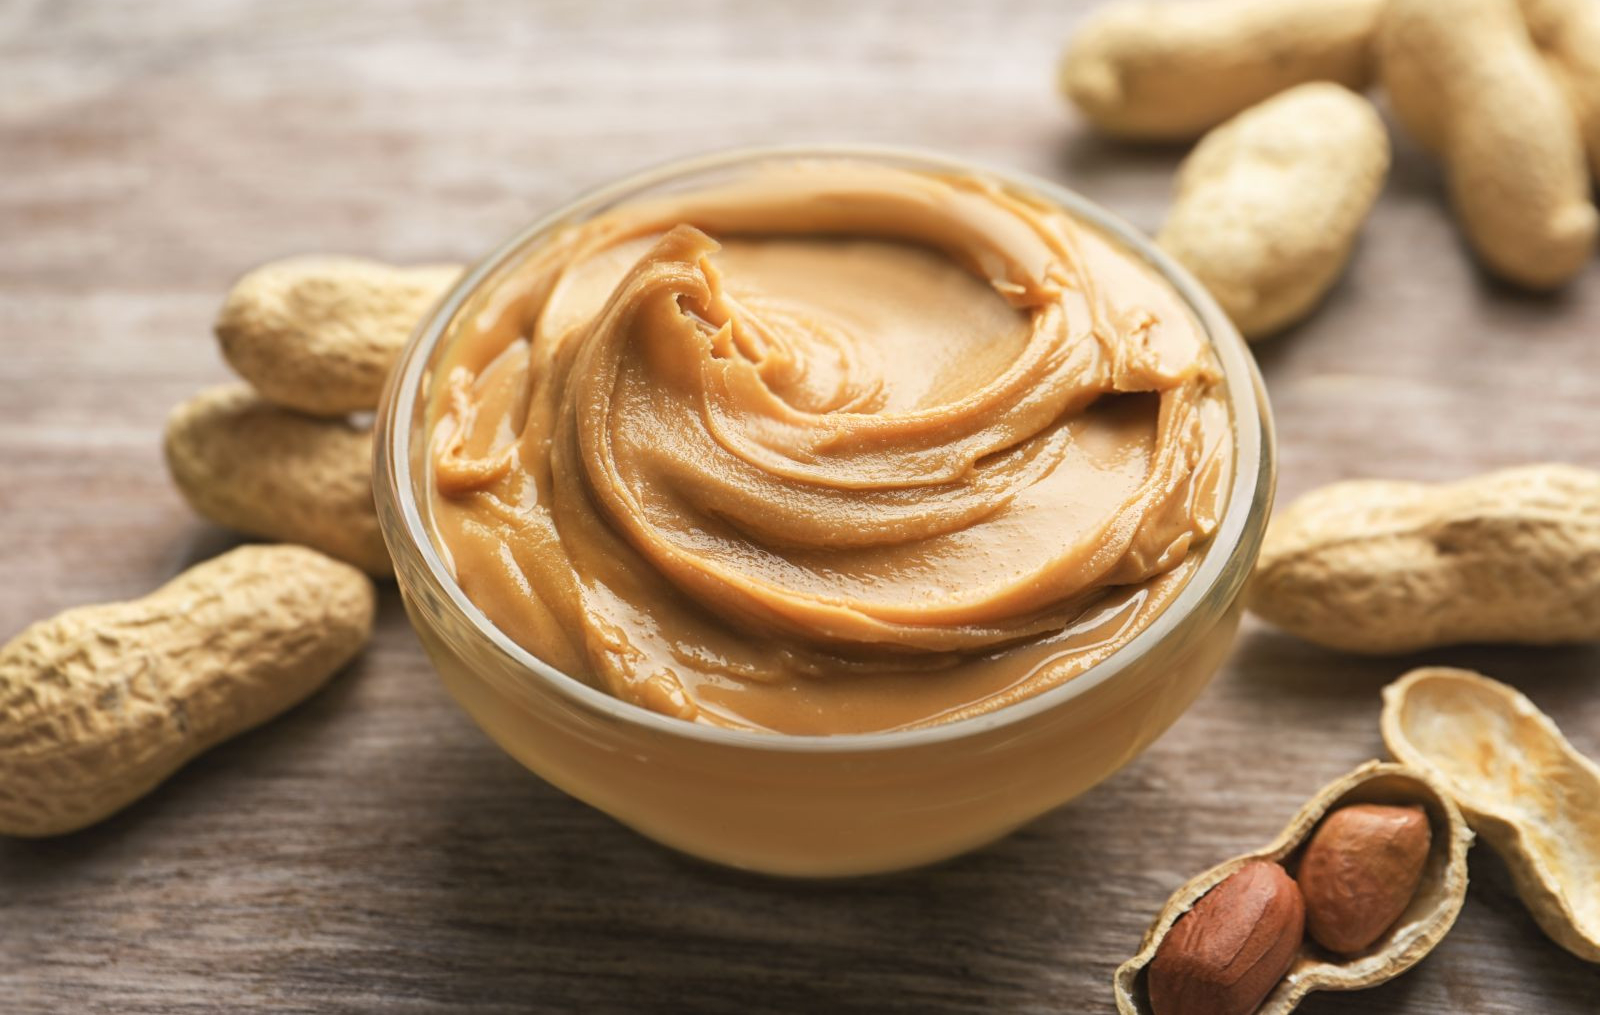 How are peanut butter and high blood pressure related?